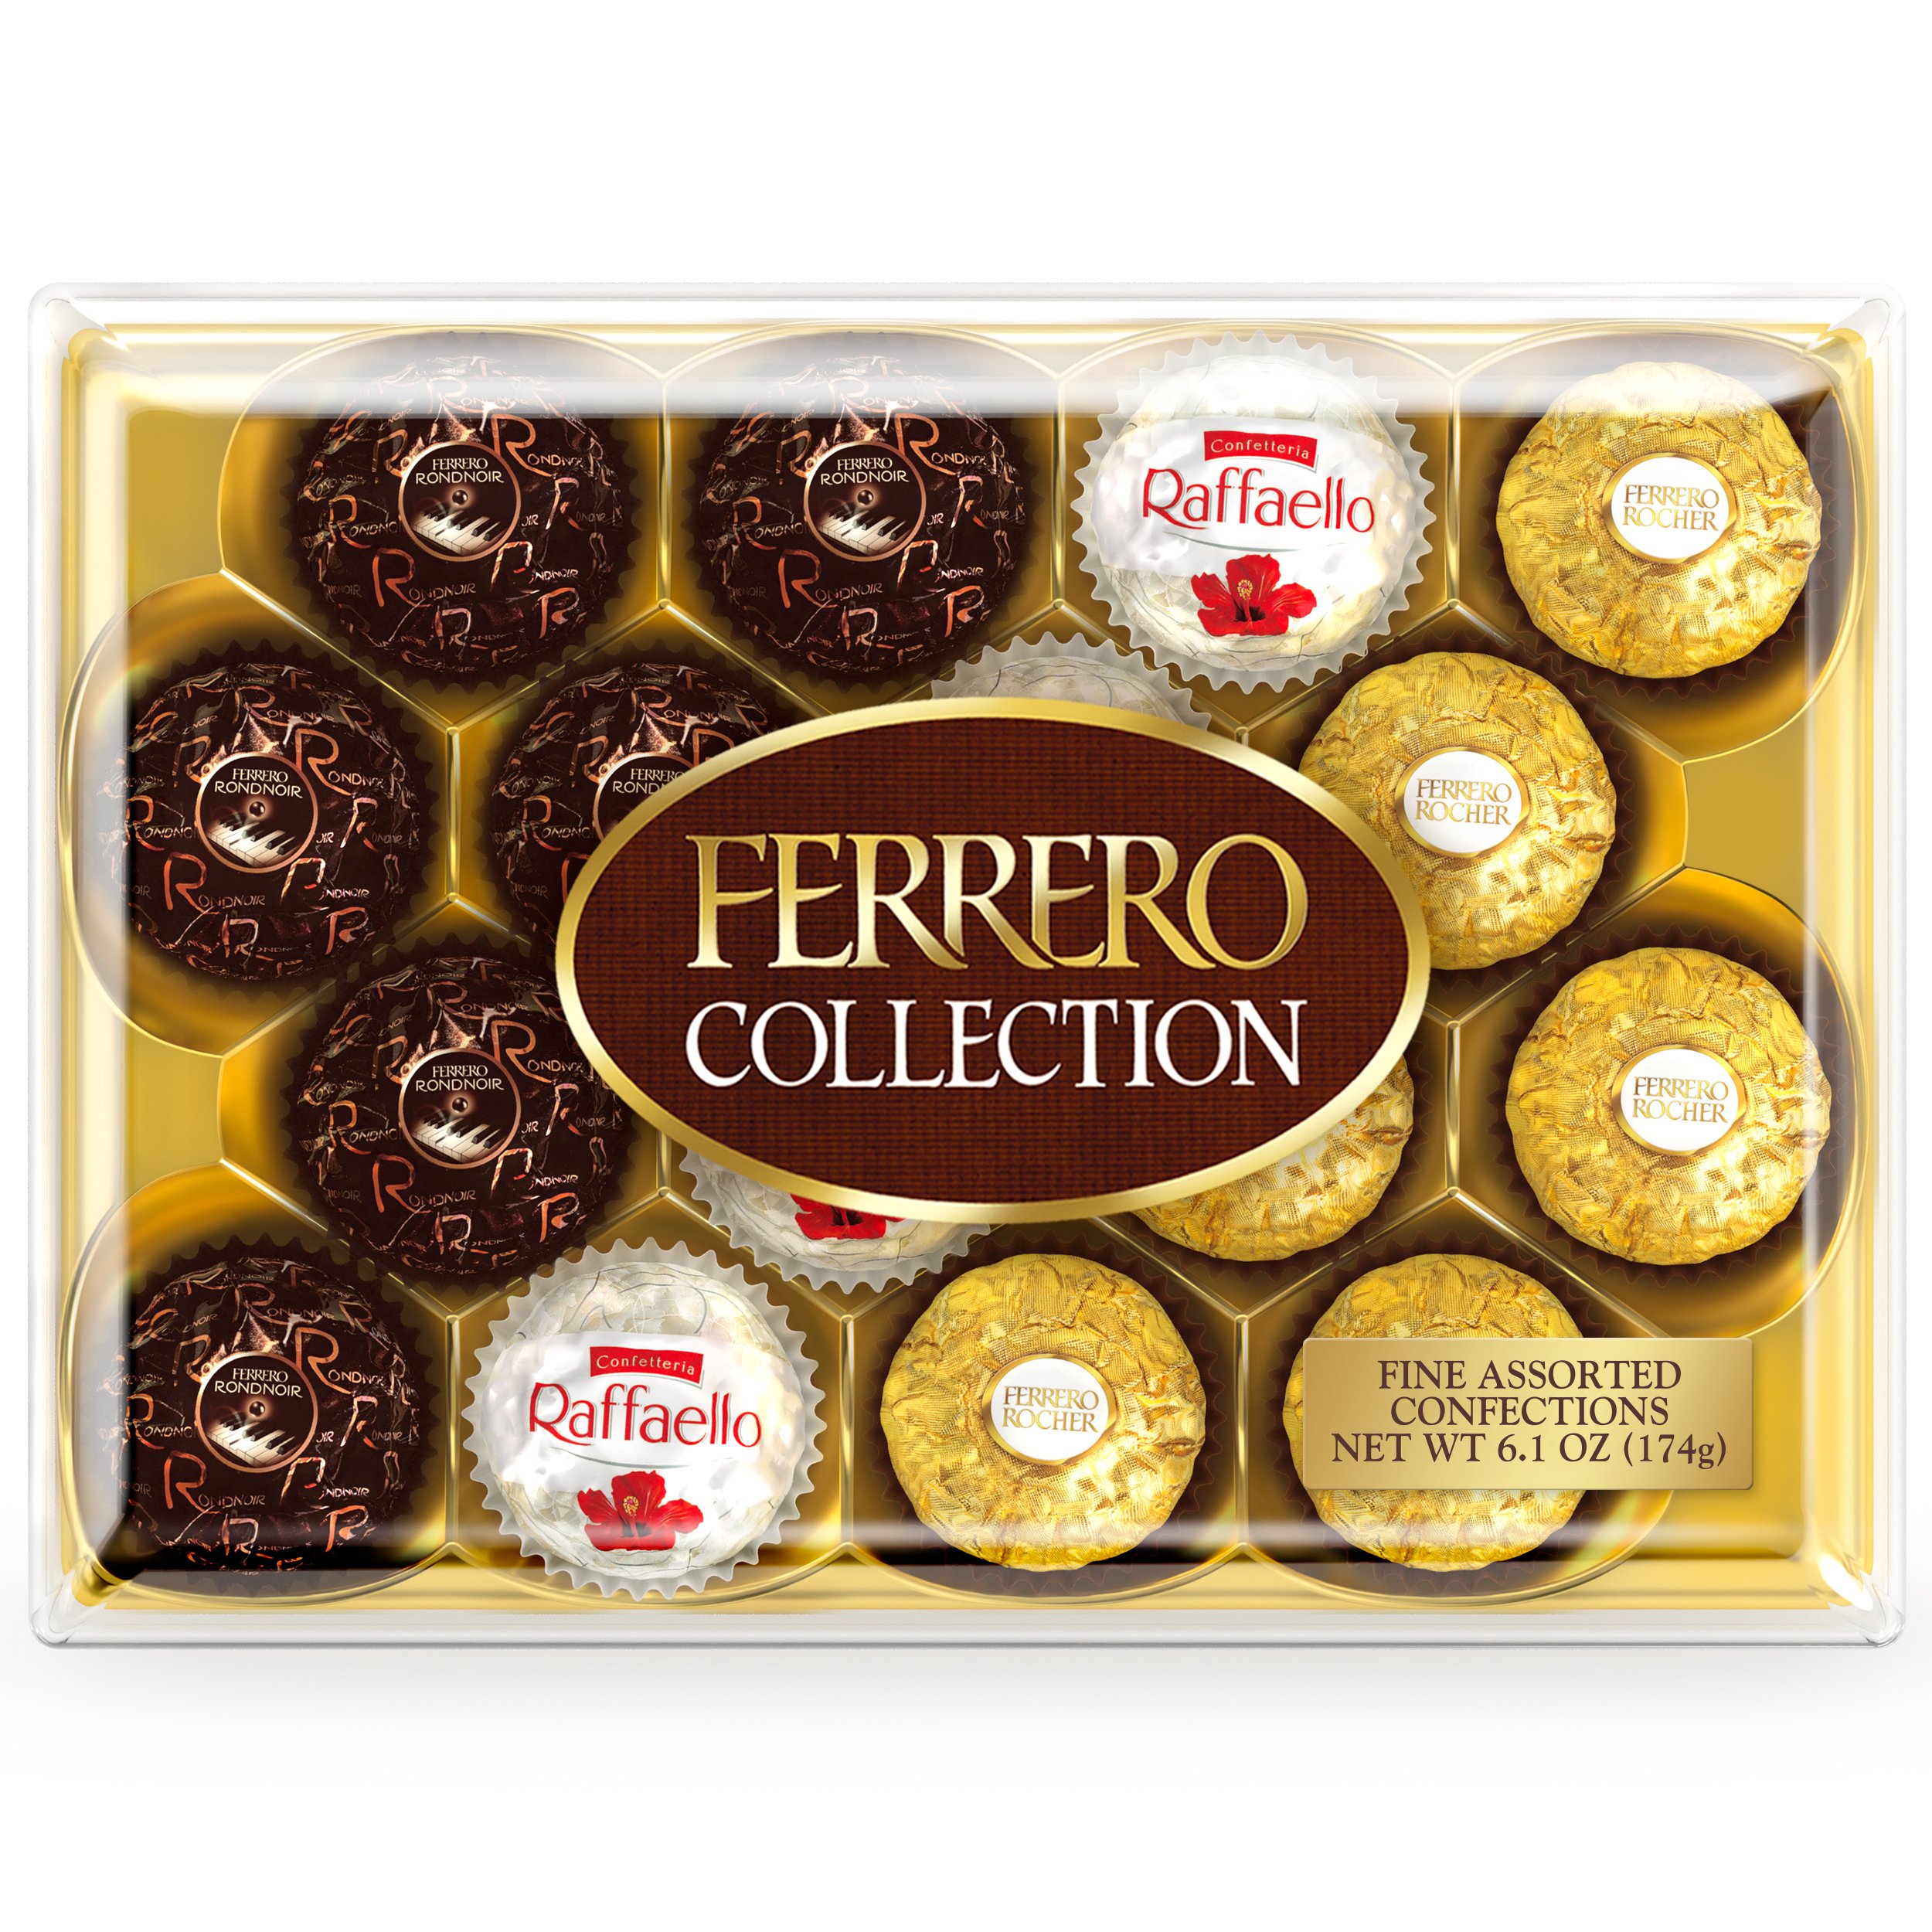 Ferrero Collection Assorted Truffles Gift Box - Shop Candy at H-E-B